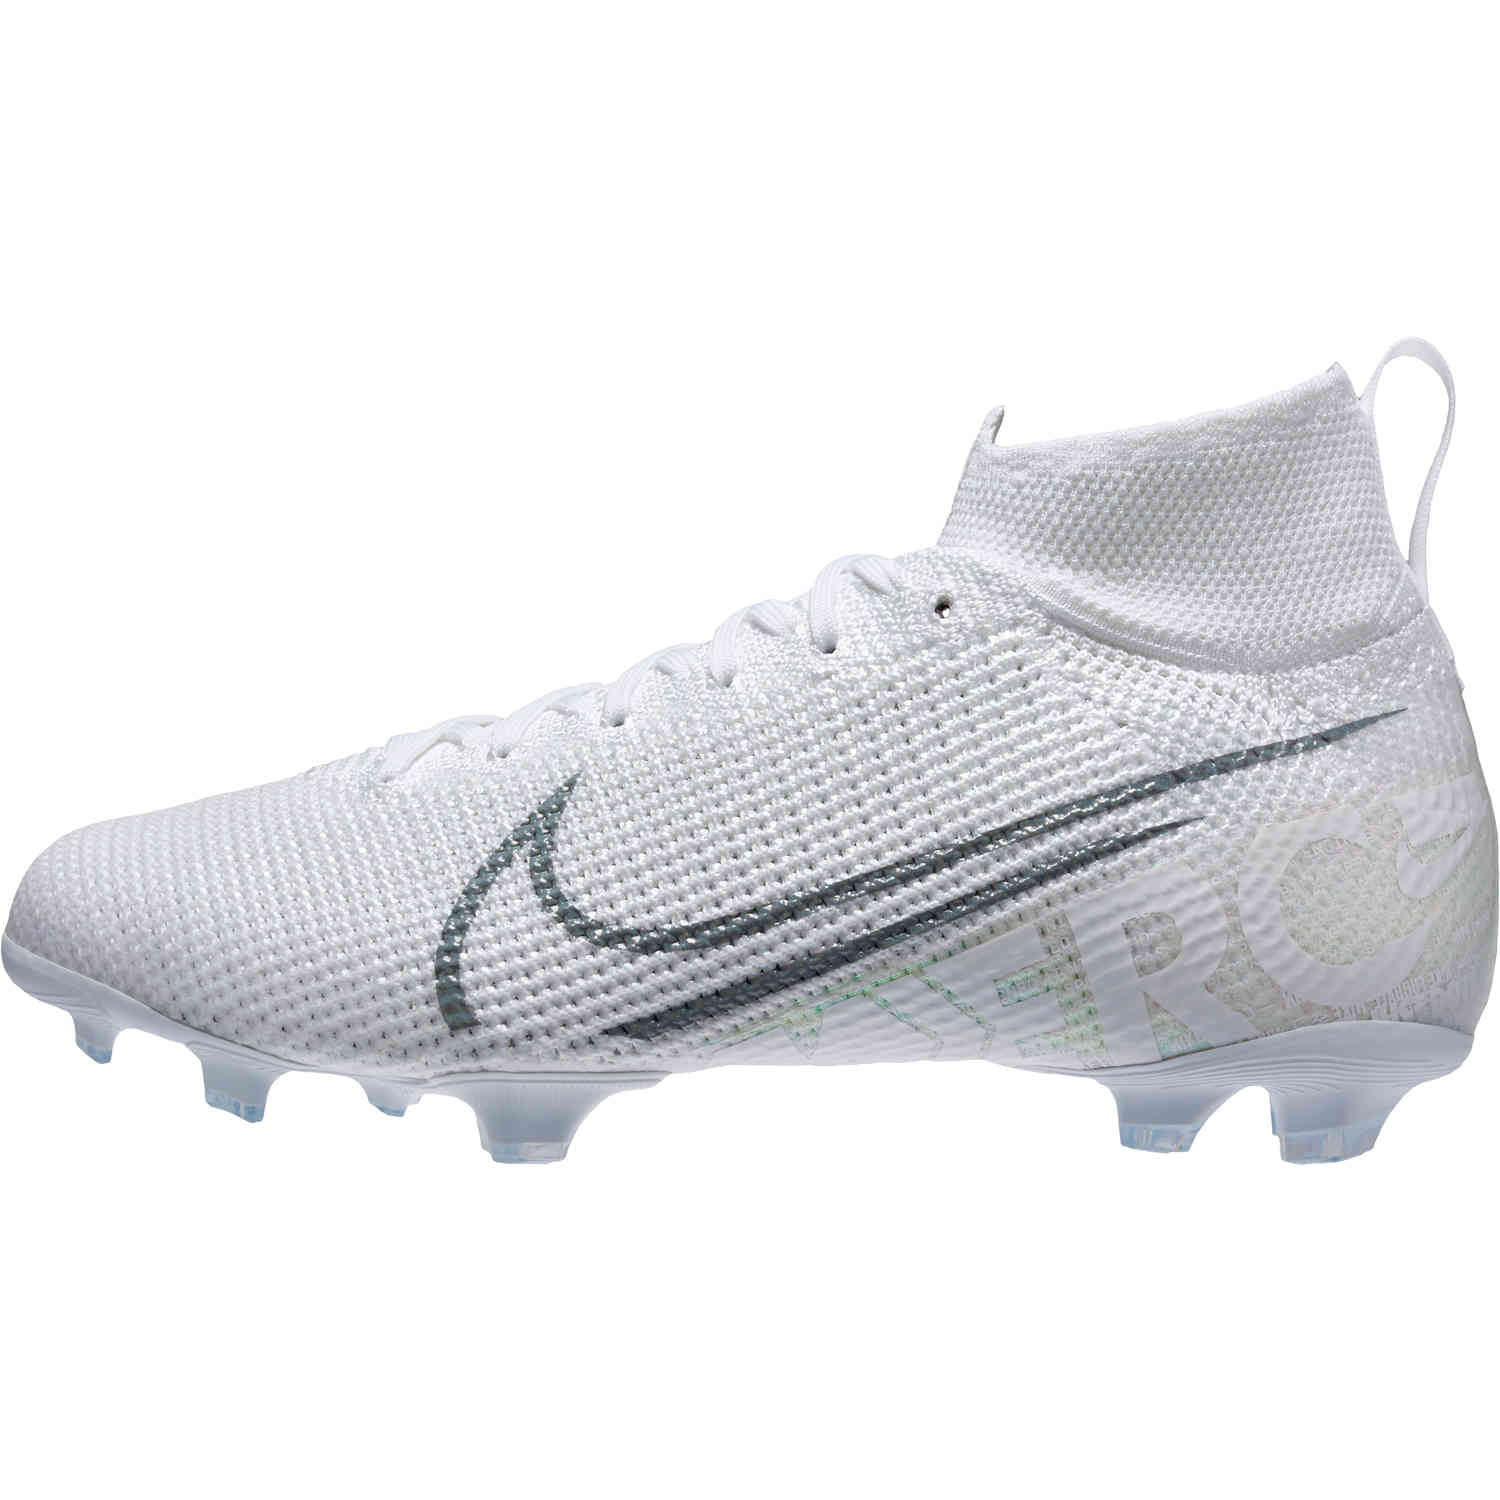 white mercurial cleats